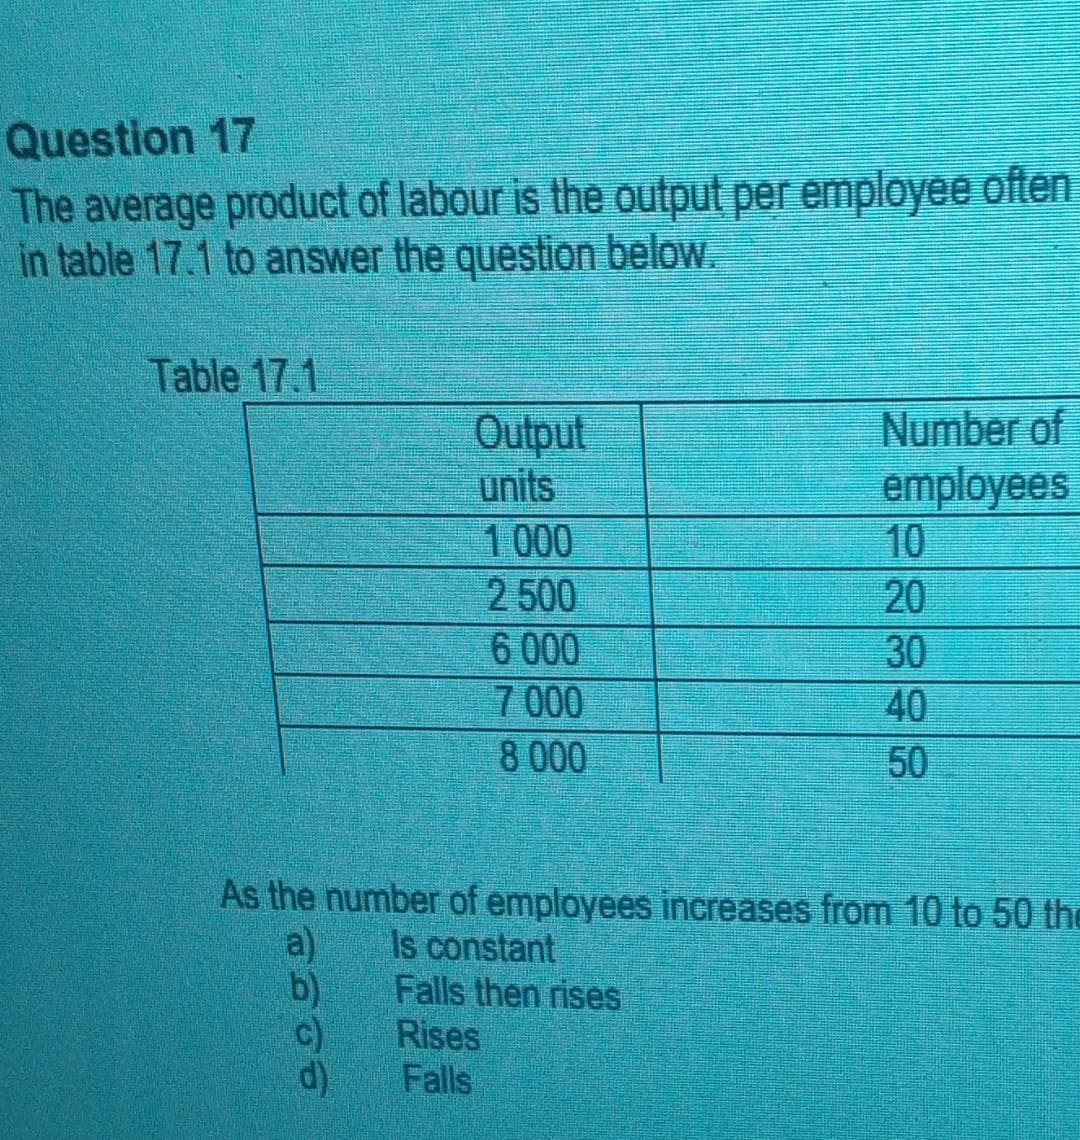 Question 17
The average product of labour is the output per employee often
in table 17.1 to answer the question below.
Table 17.1
Output
units
1000
2 500
6 000
7 000
8 000
C)
d)
Number of
employees
10
20
30
50
As the number of employees increases from 10 to 50 the
a)
Is constant
b)
Falls then rises
Rises
Falls